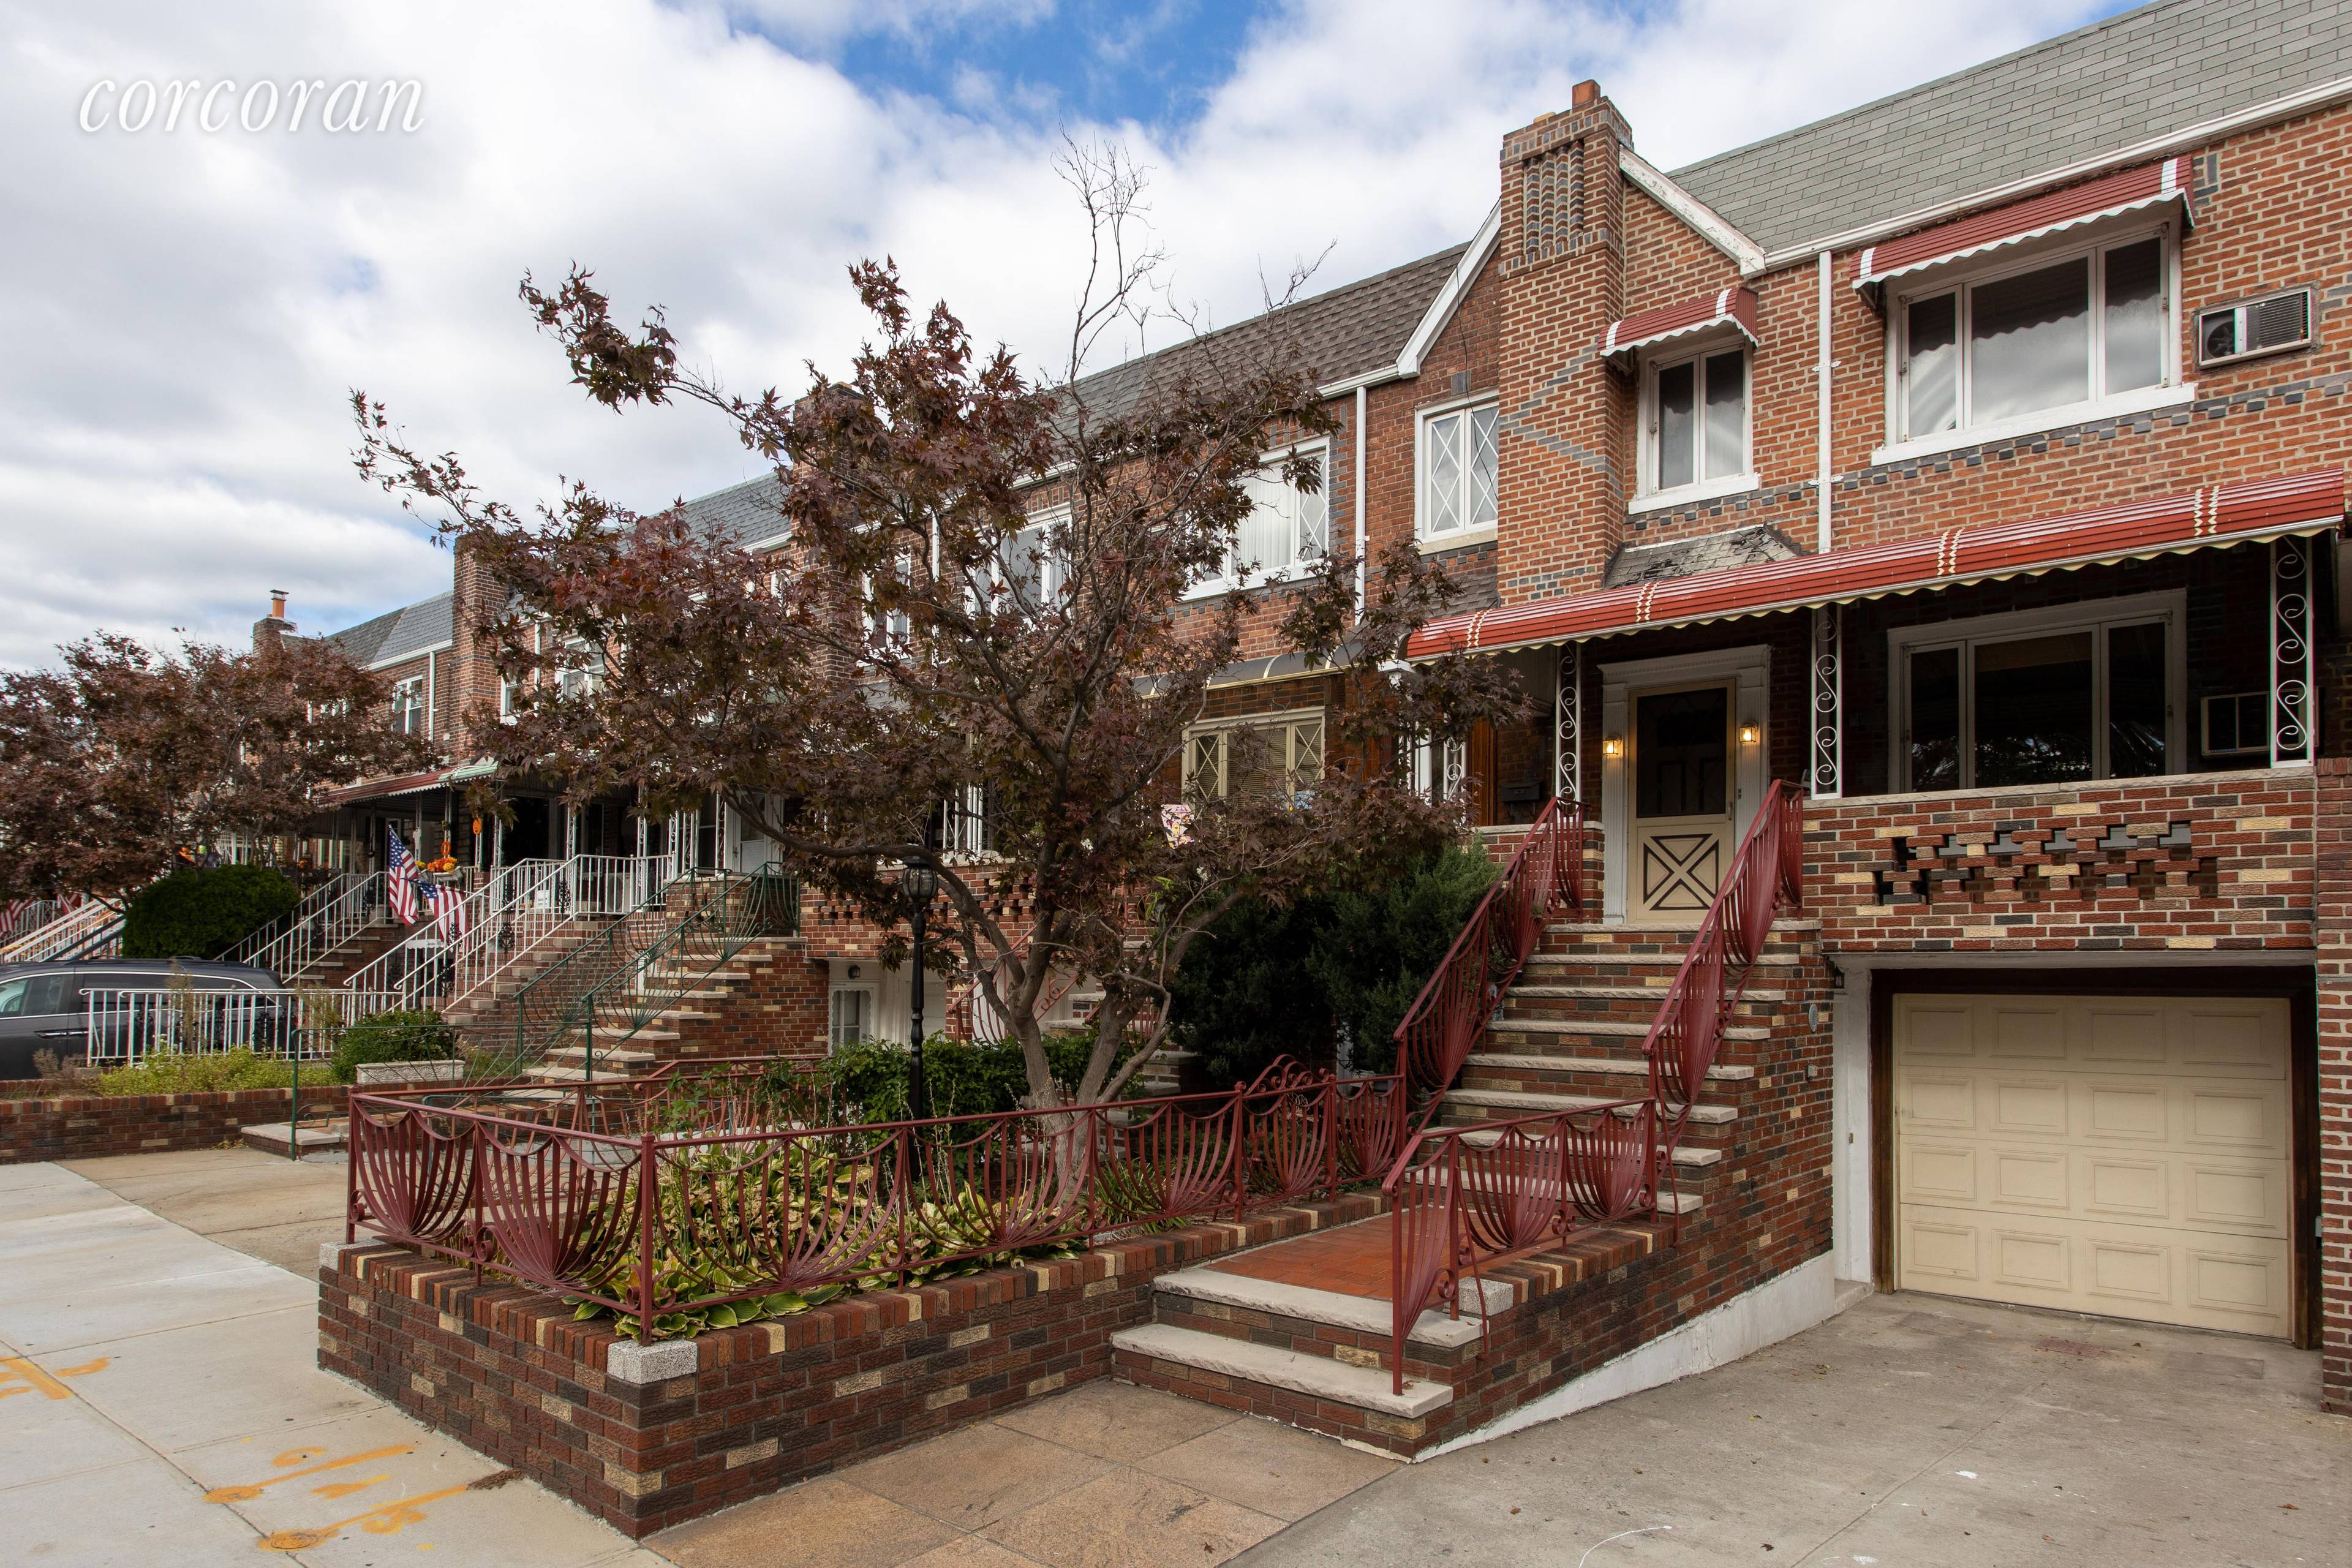 Showing by appointment only Welcome to 1367 86th Street, located in prime Dyker Heights.